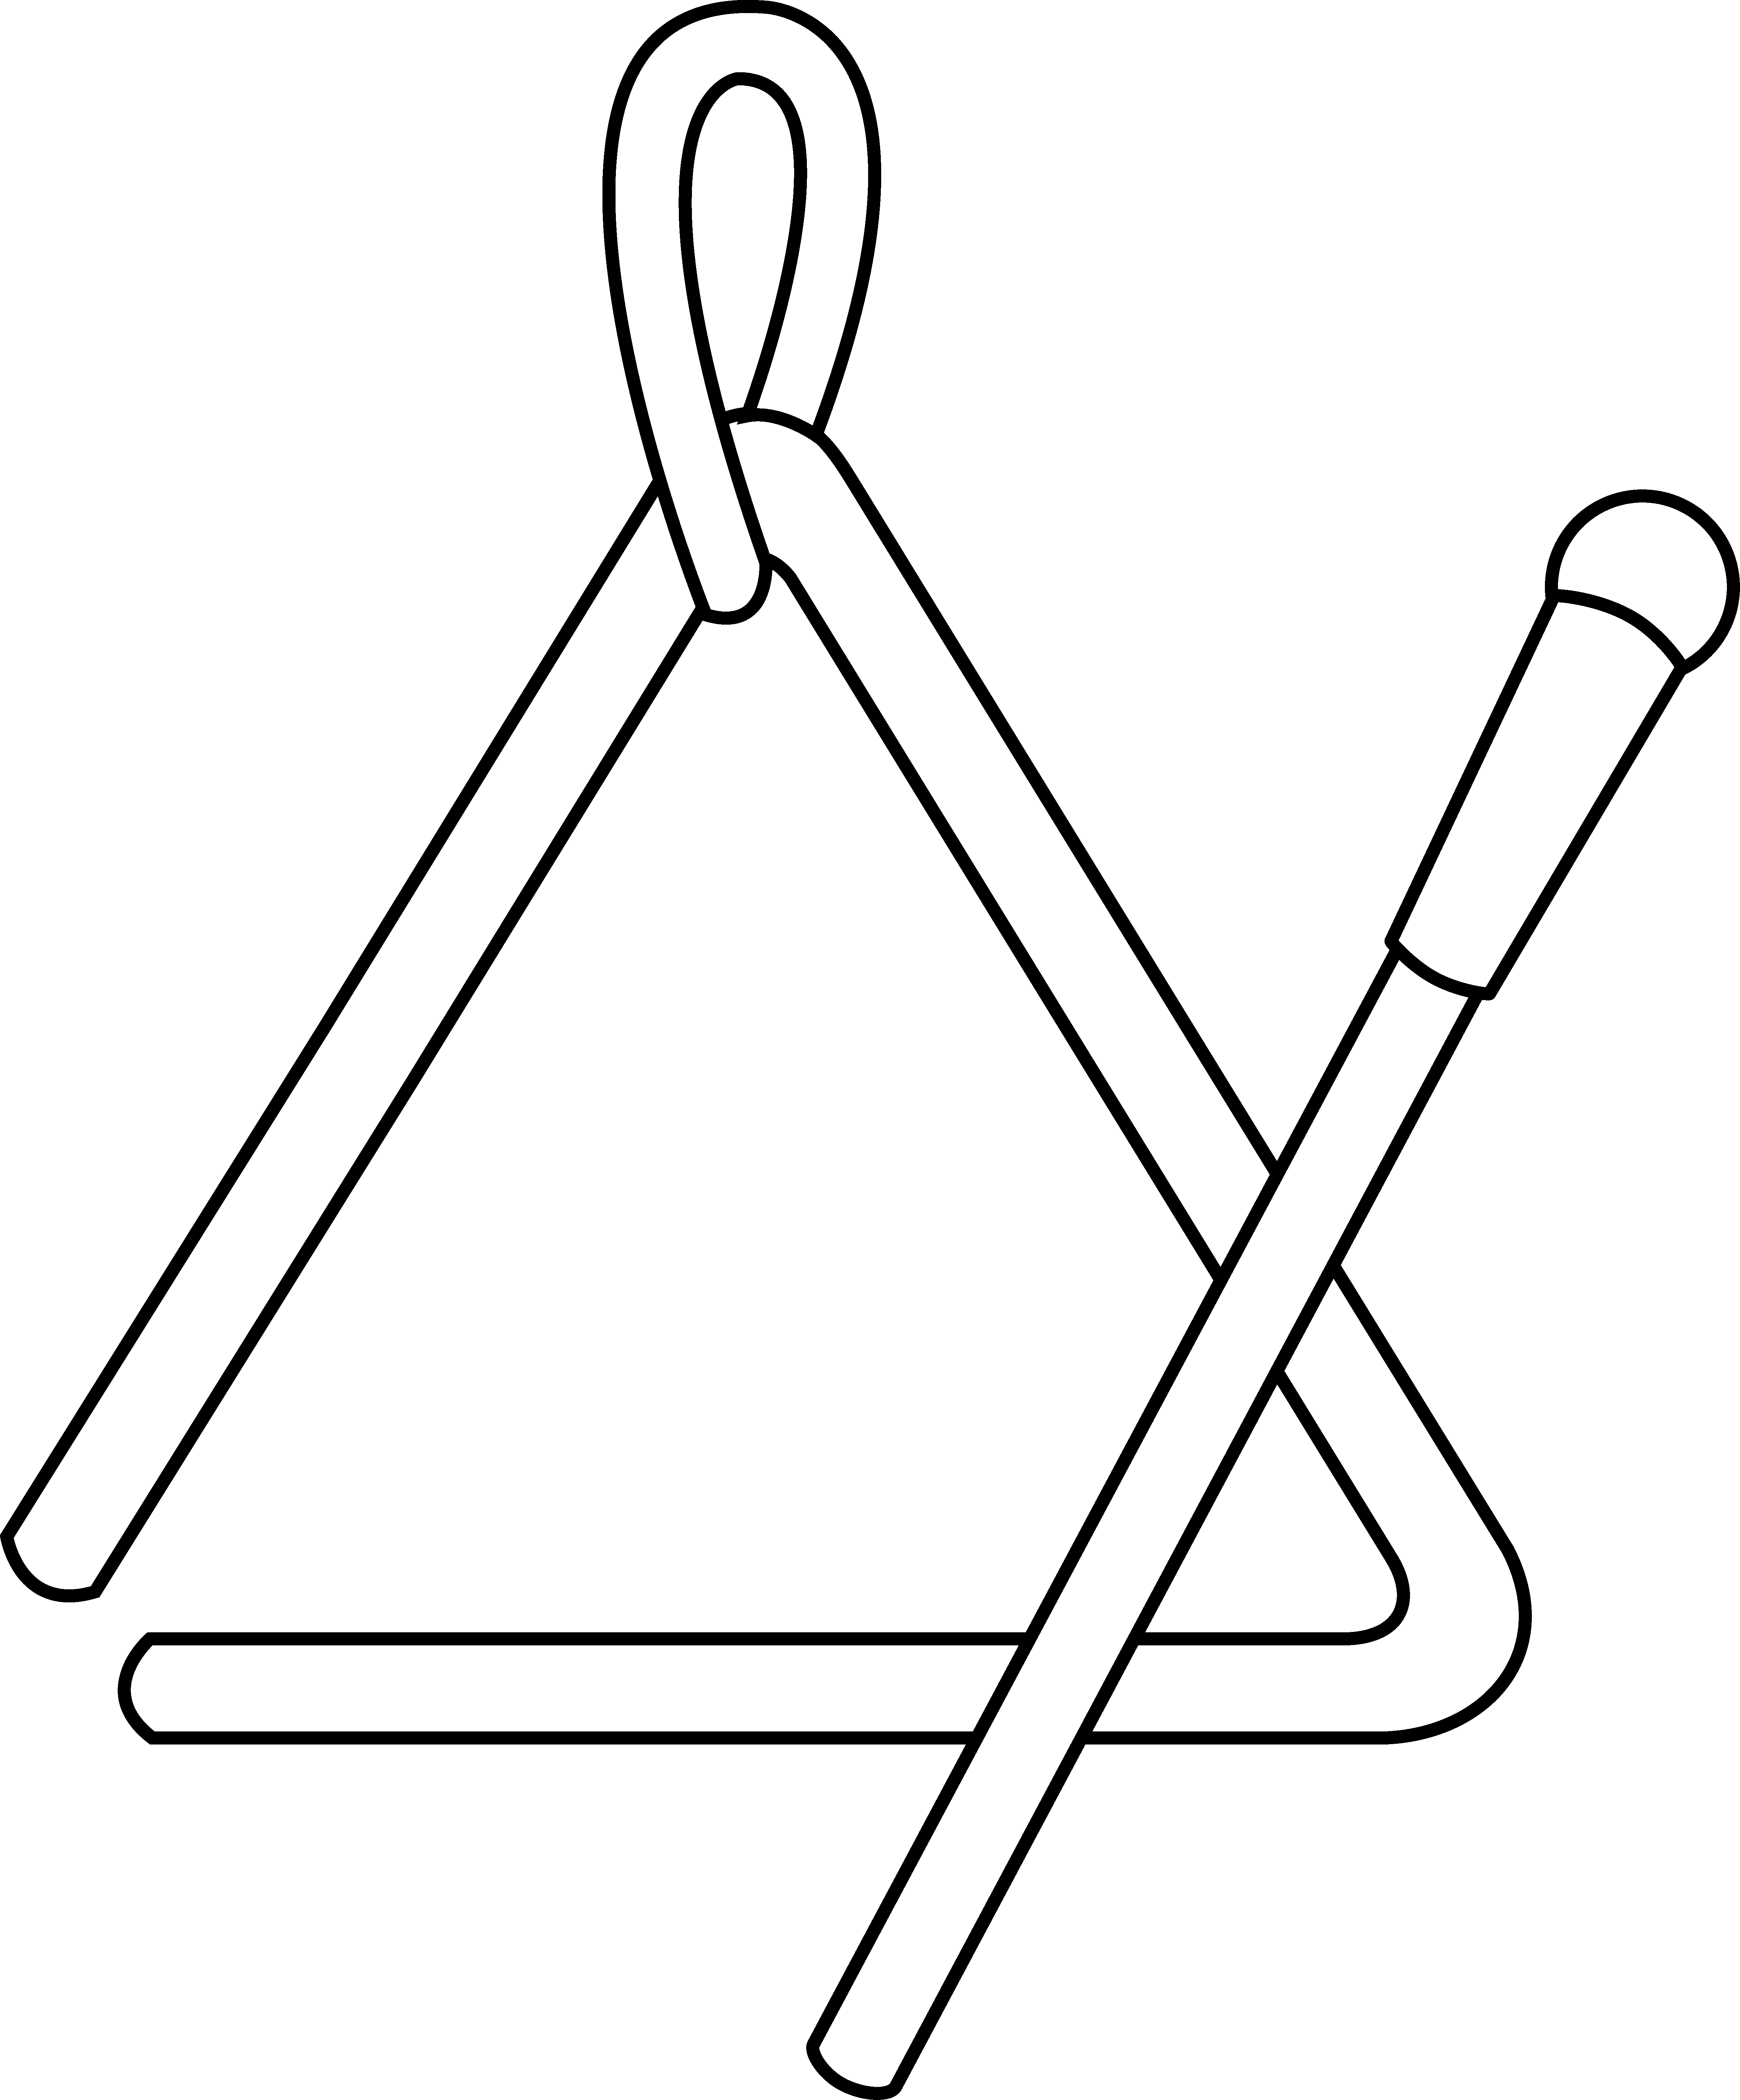 Triangle instrument line art. Xylophone clipart sketch